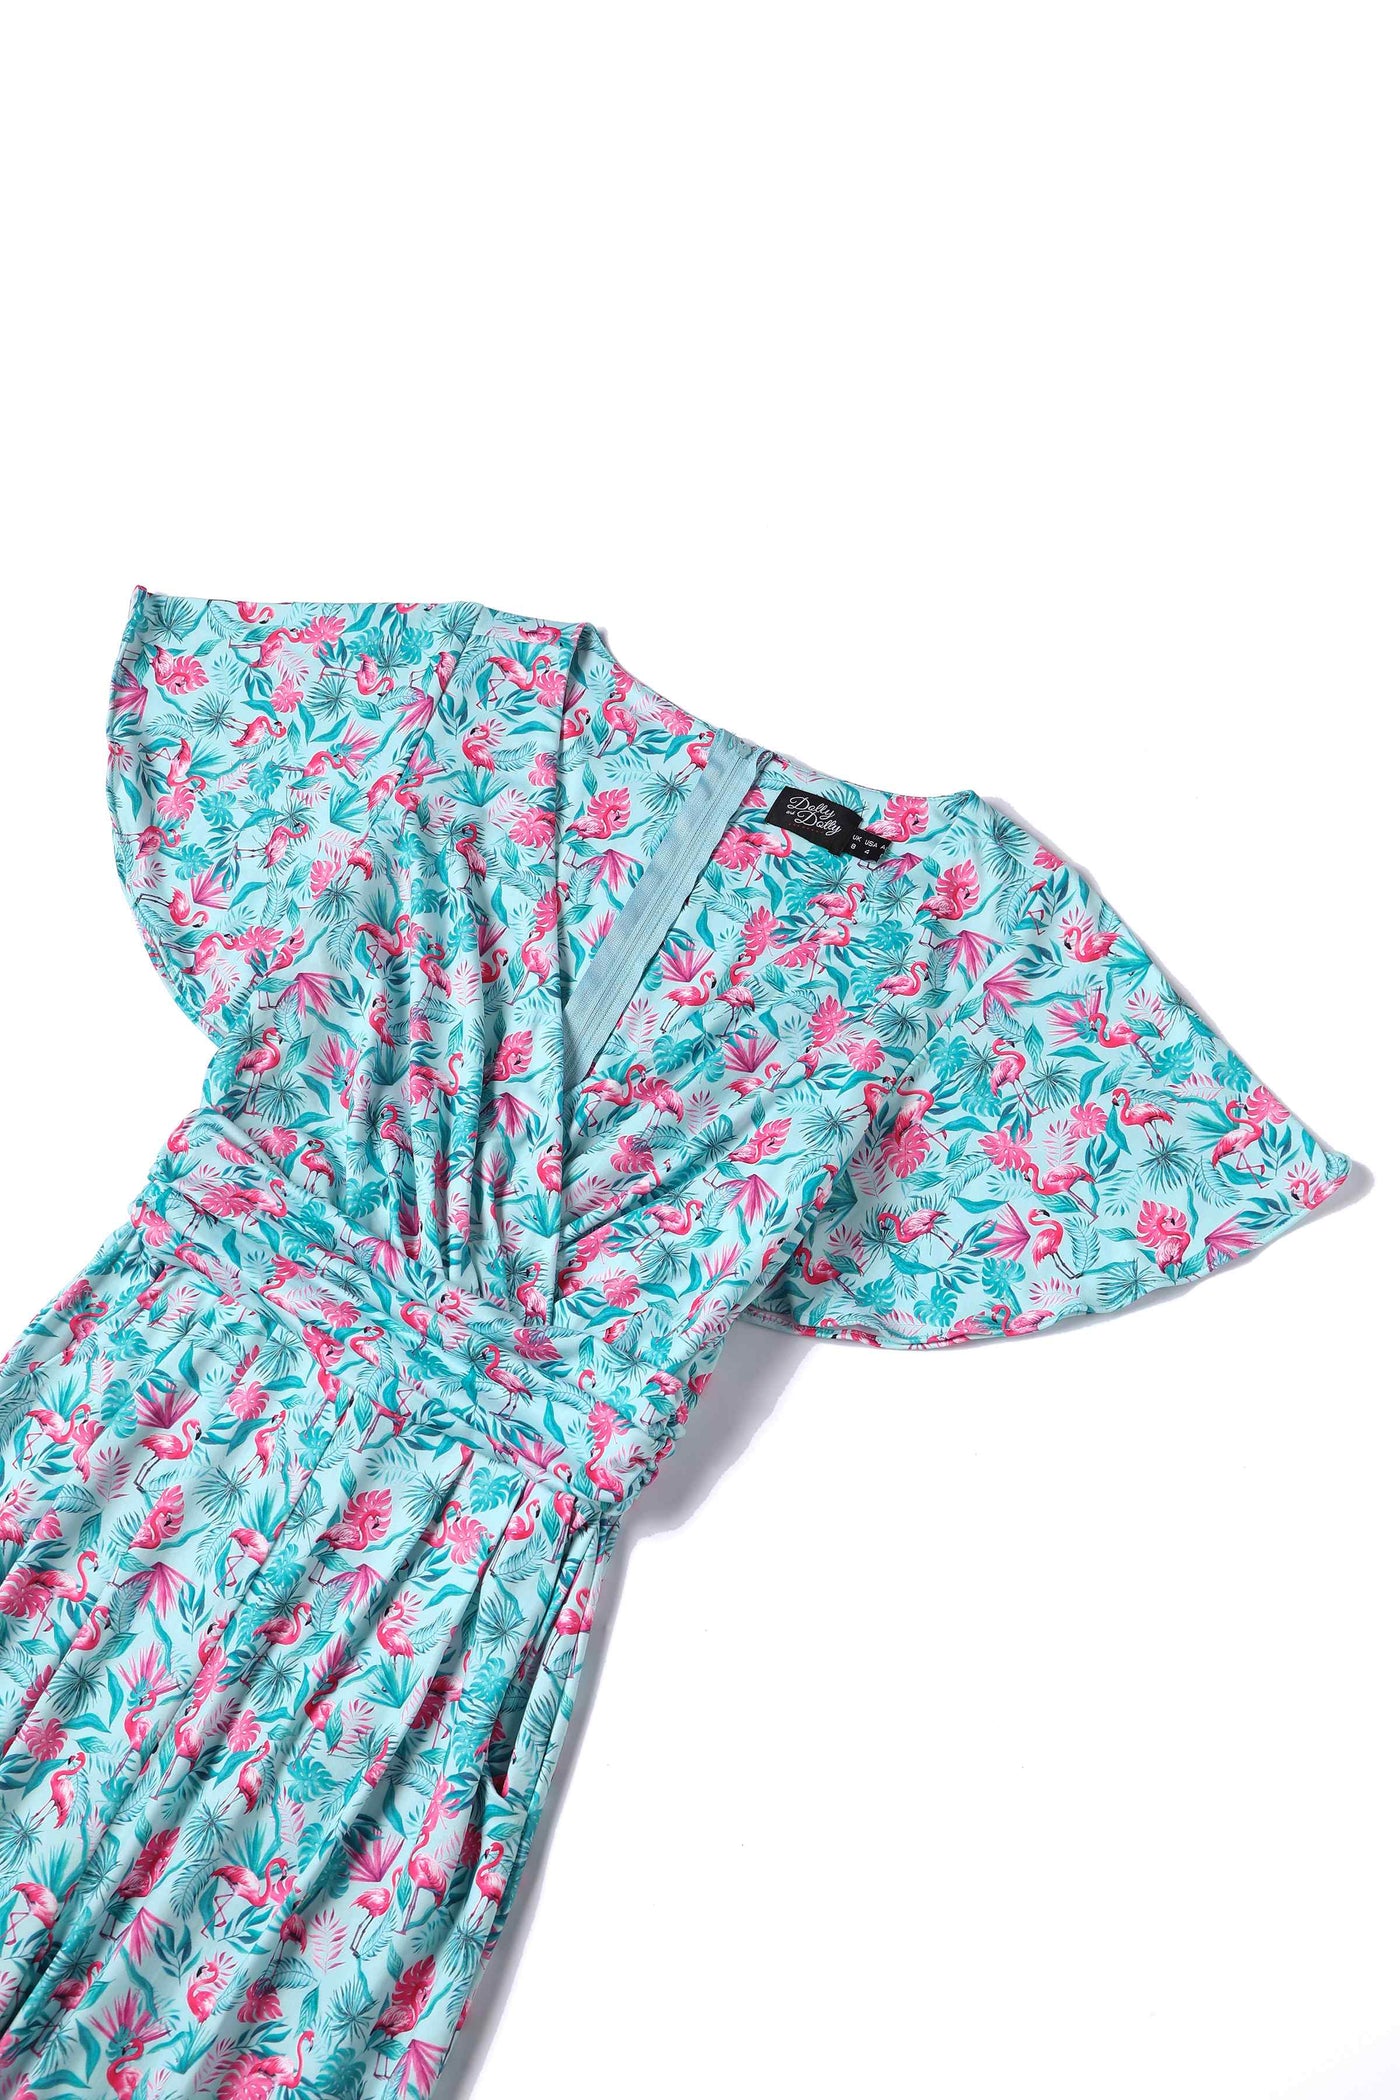 Close up view of View of Summer Flamingo Baby Blue Jumpsuit